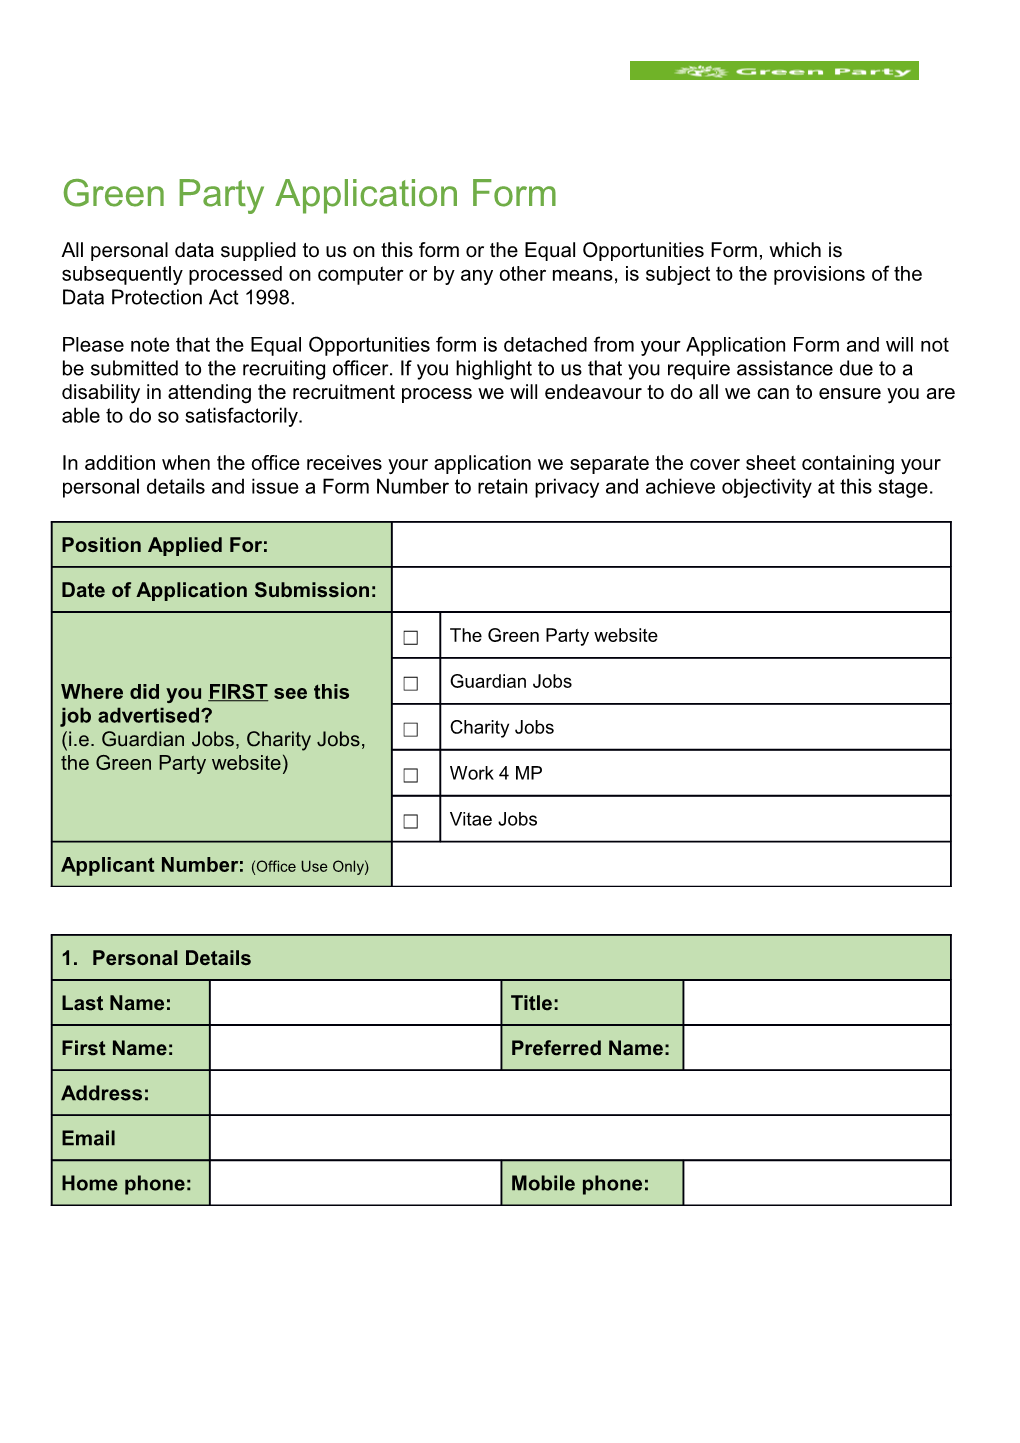 Green Party Application Form